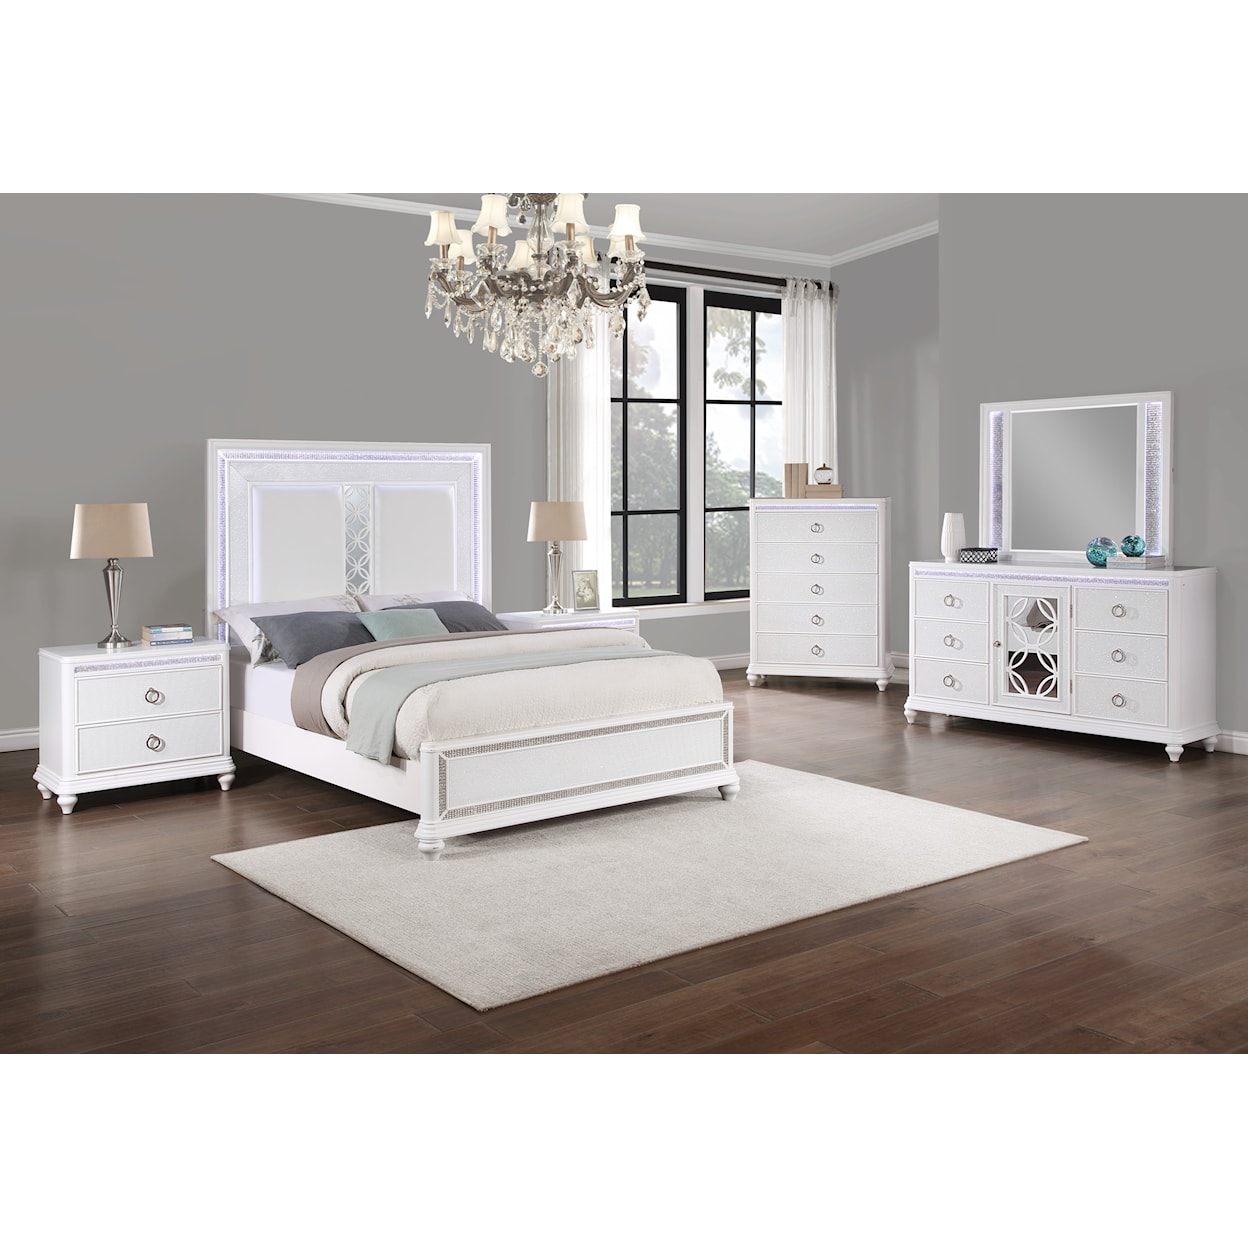 Holland House Glamour 6PC Queen Bedroom